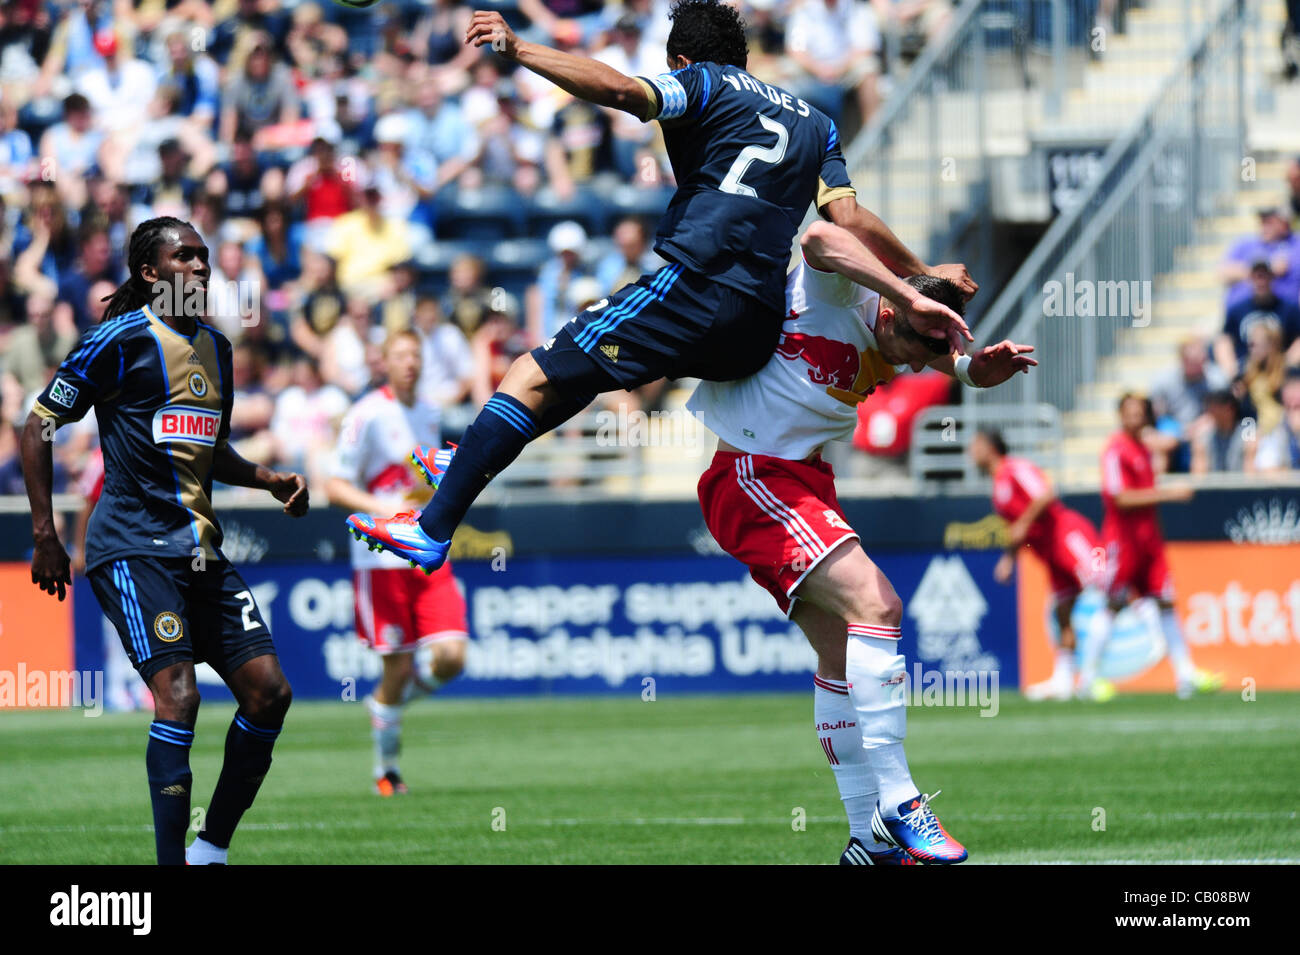 May 13, 2012 - Chester, Pennsylvania, U.S - Philadelphia Union's CARLOS VALDES in action against the Red Bulls at PPL Park. The Red Bulls won 3-2. (Credit Image: © Ricky Fitchett/ZUMAPRESS.com) Stock Photo